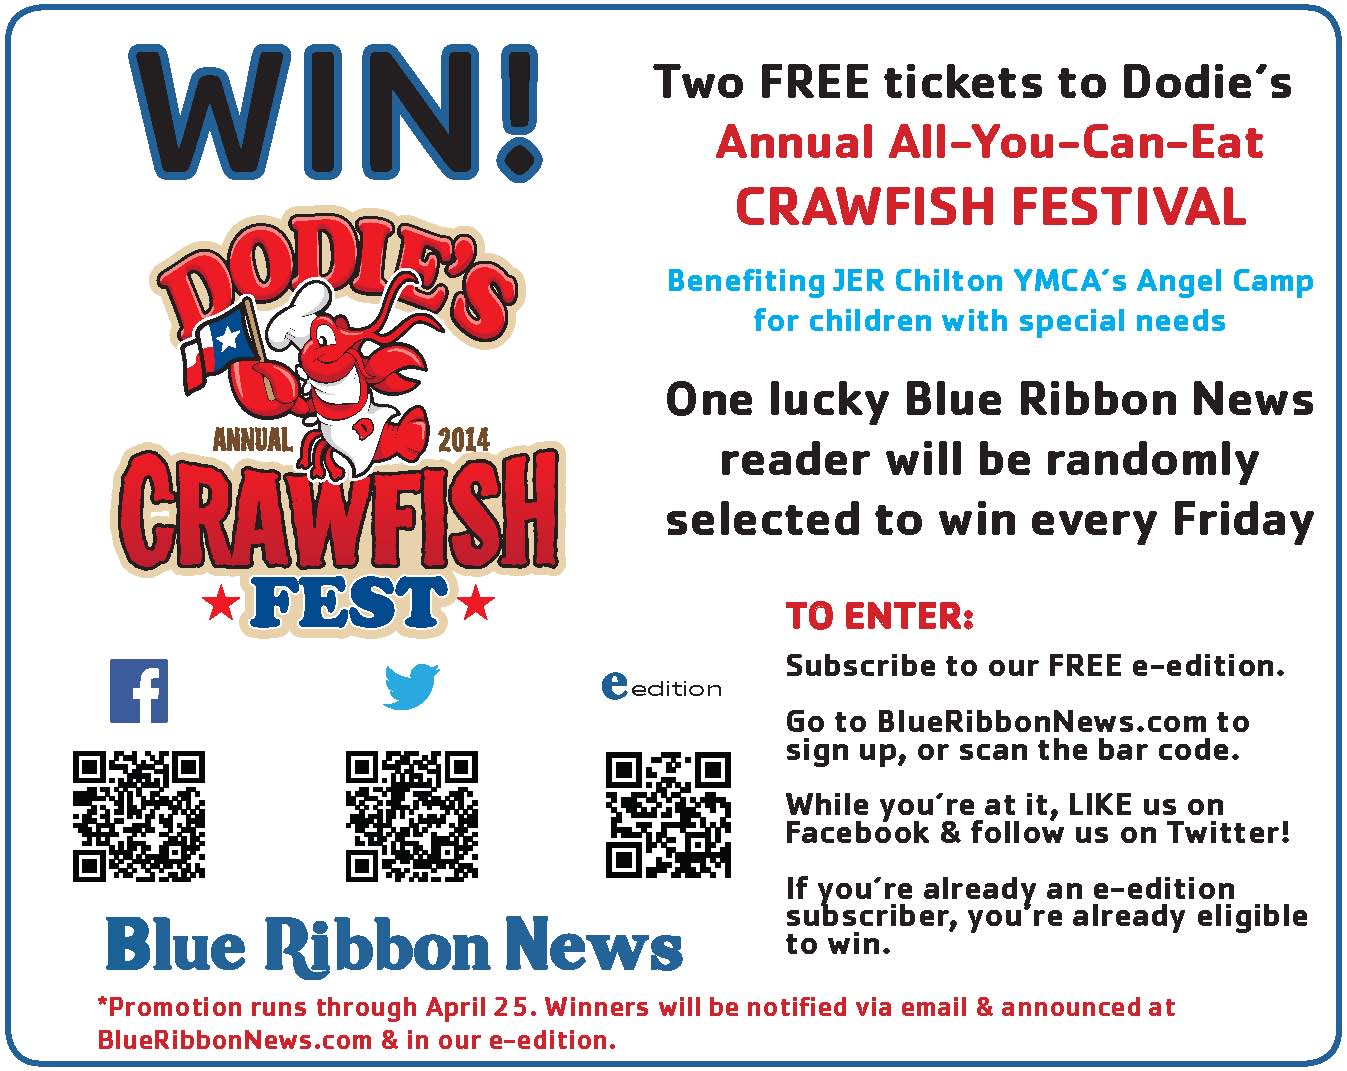 Another Blue Ribbon News reader wins Crawfish Fest tickets